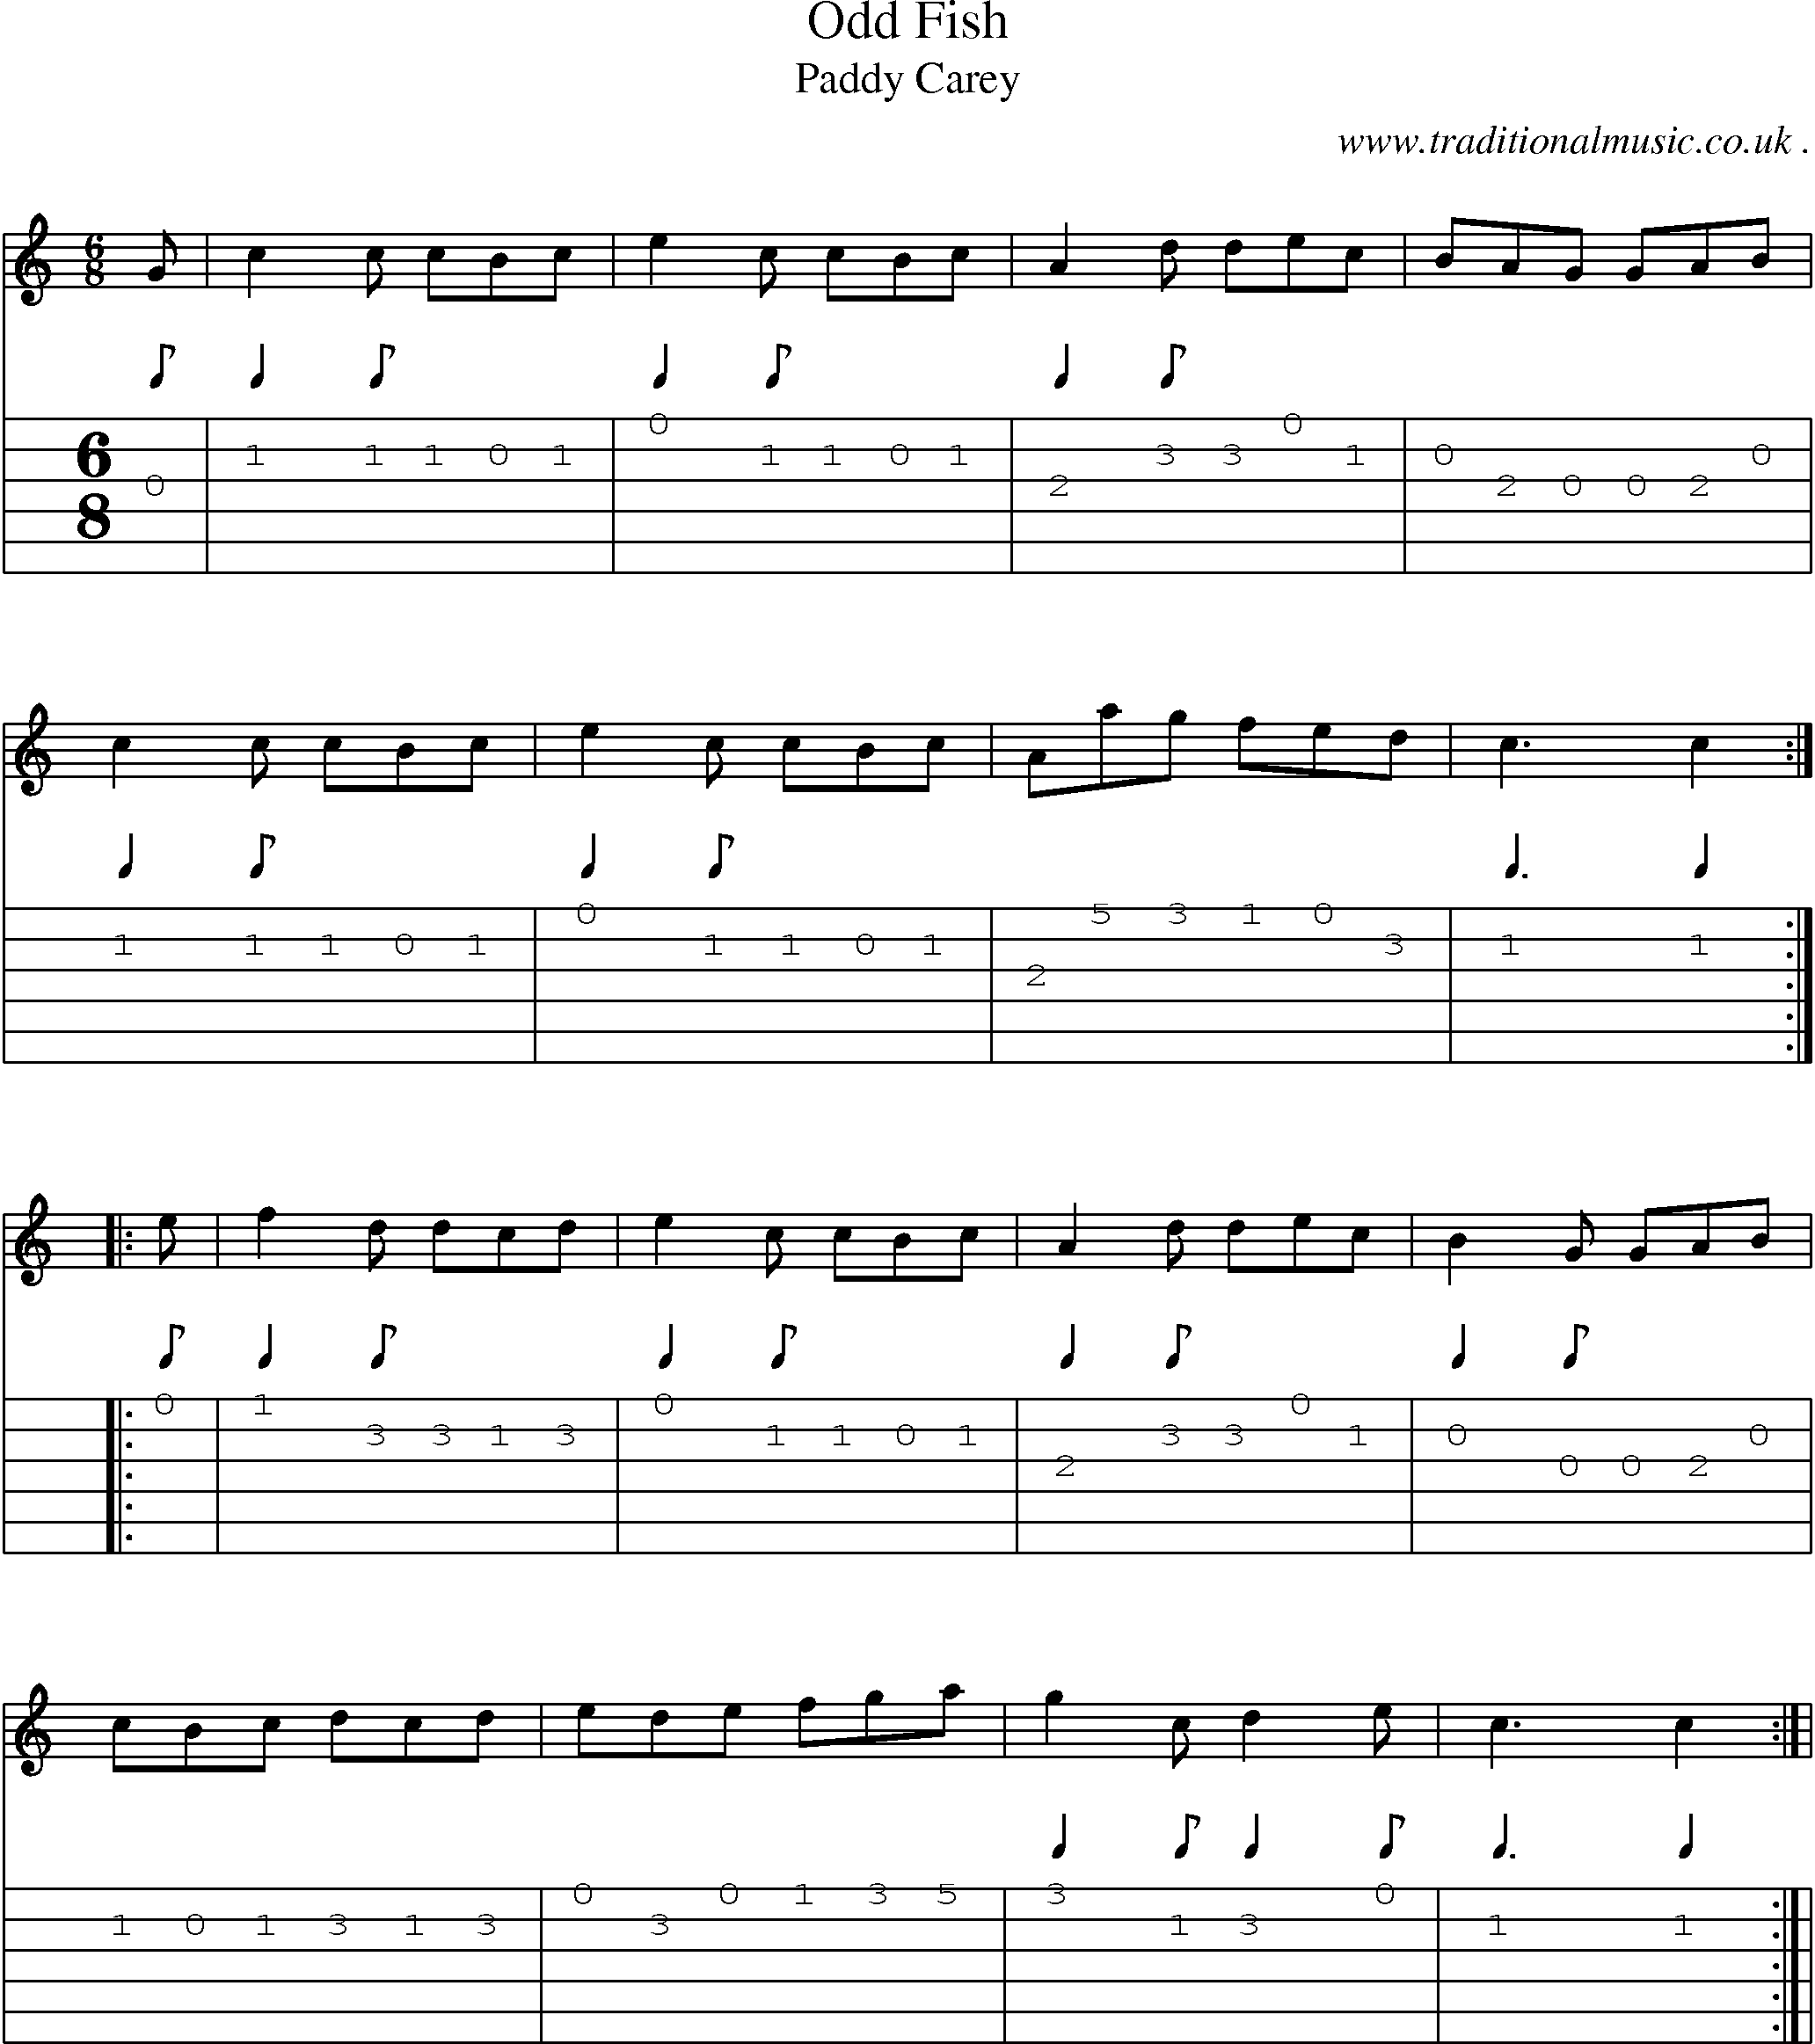 Sheet-Music and Guitar Tabs for Odd Fish